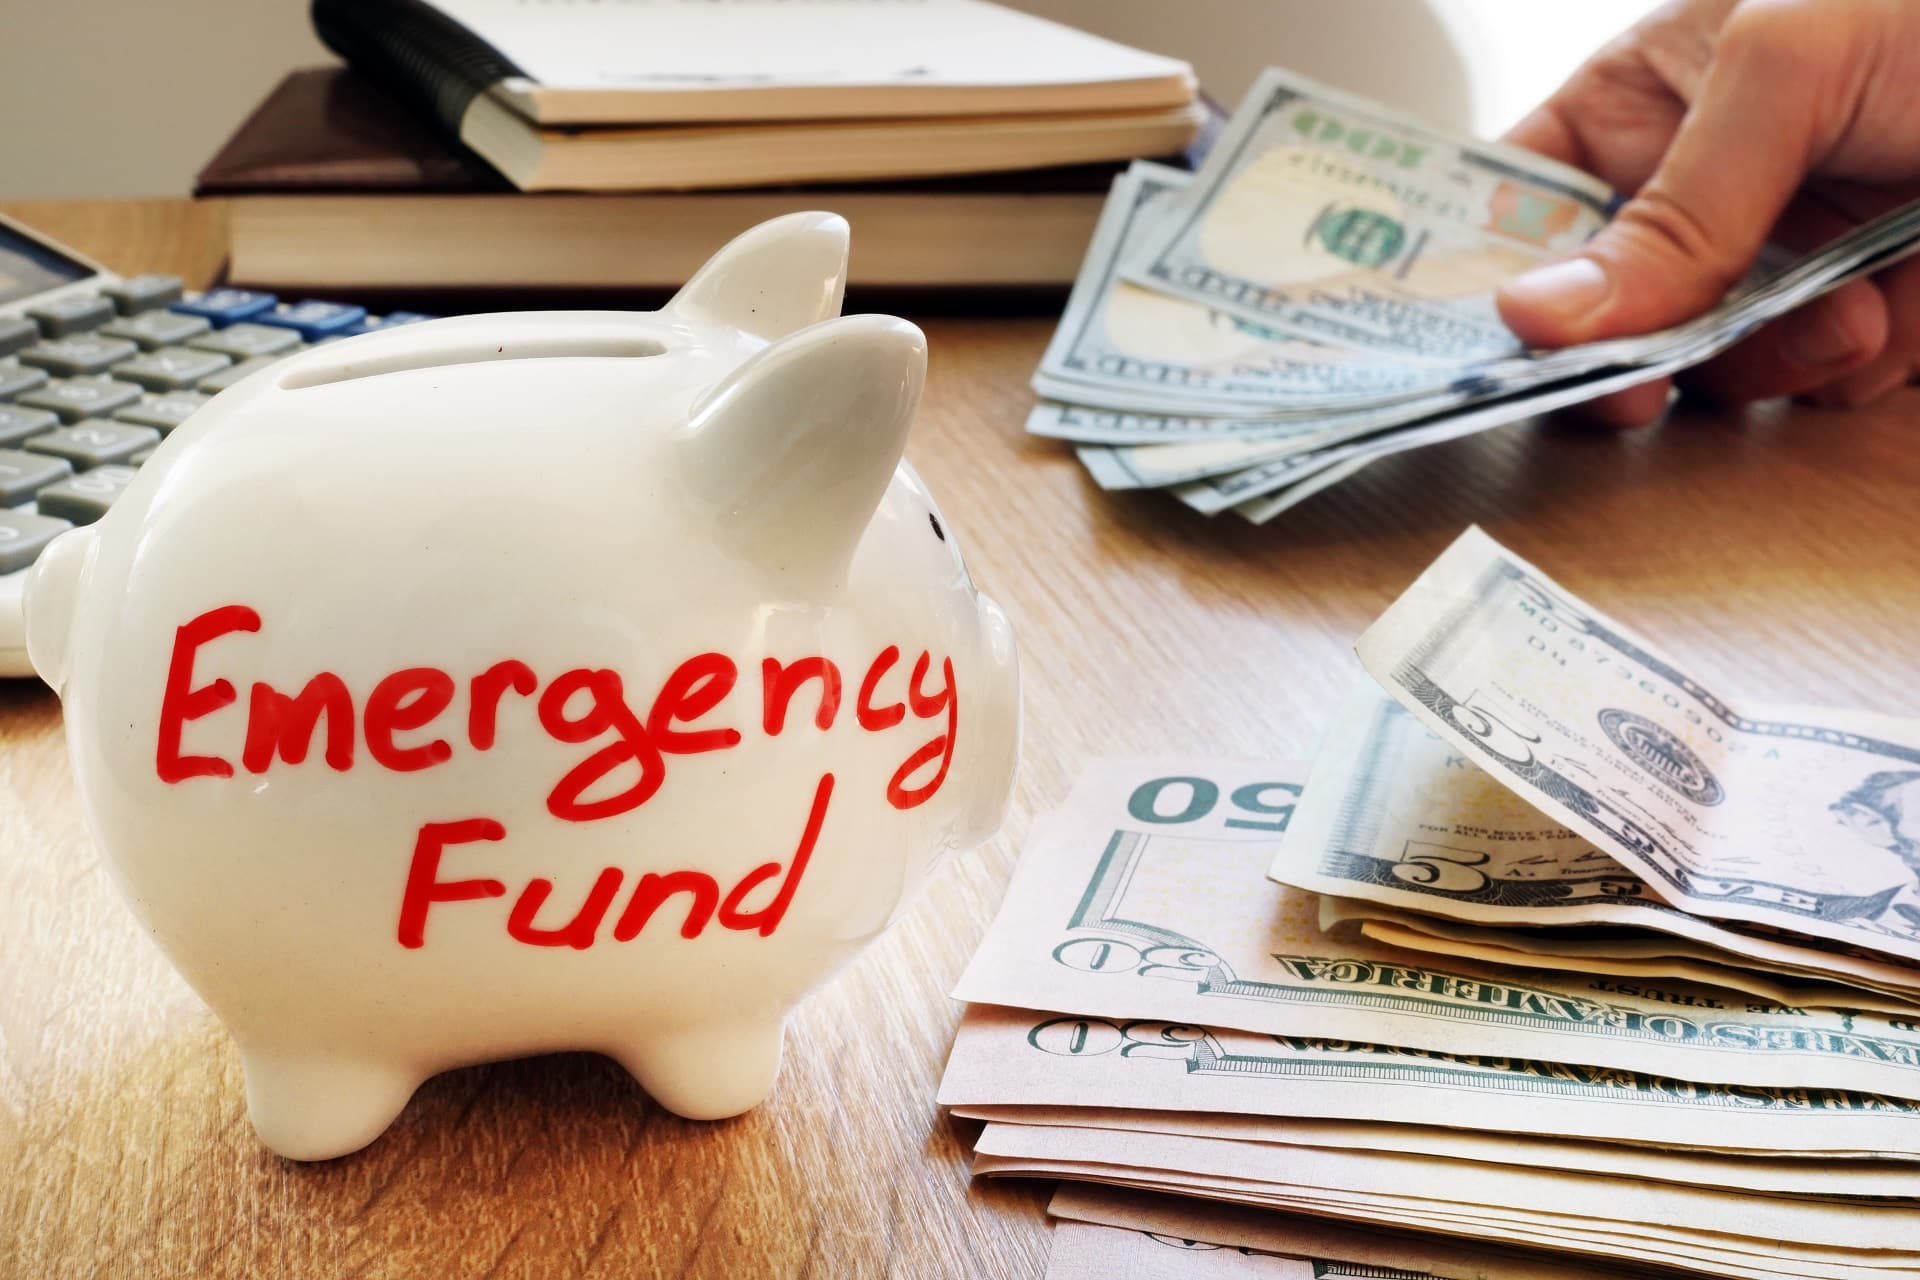 Emergency Funding for International Students, See Application Details